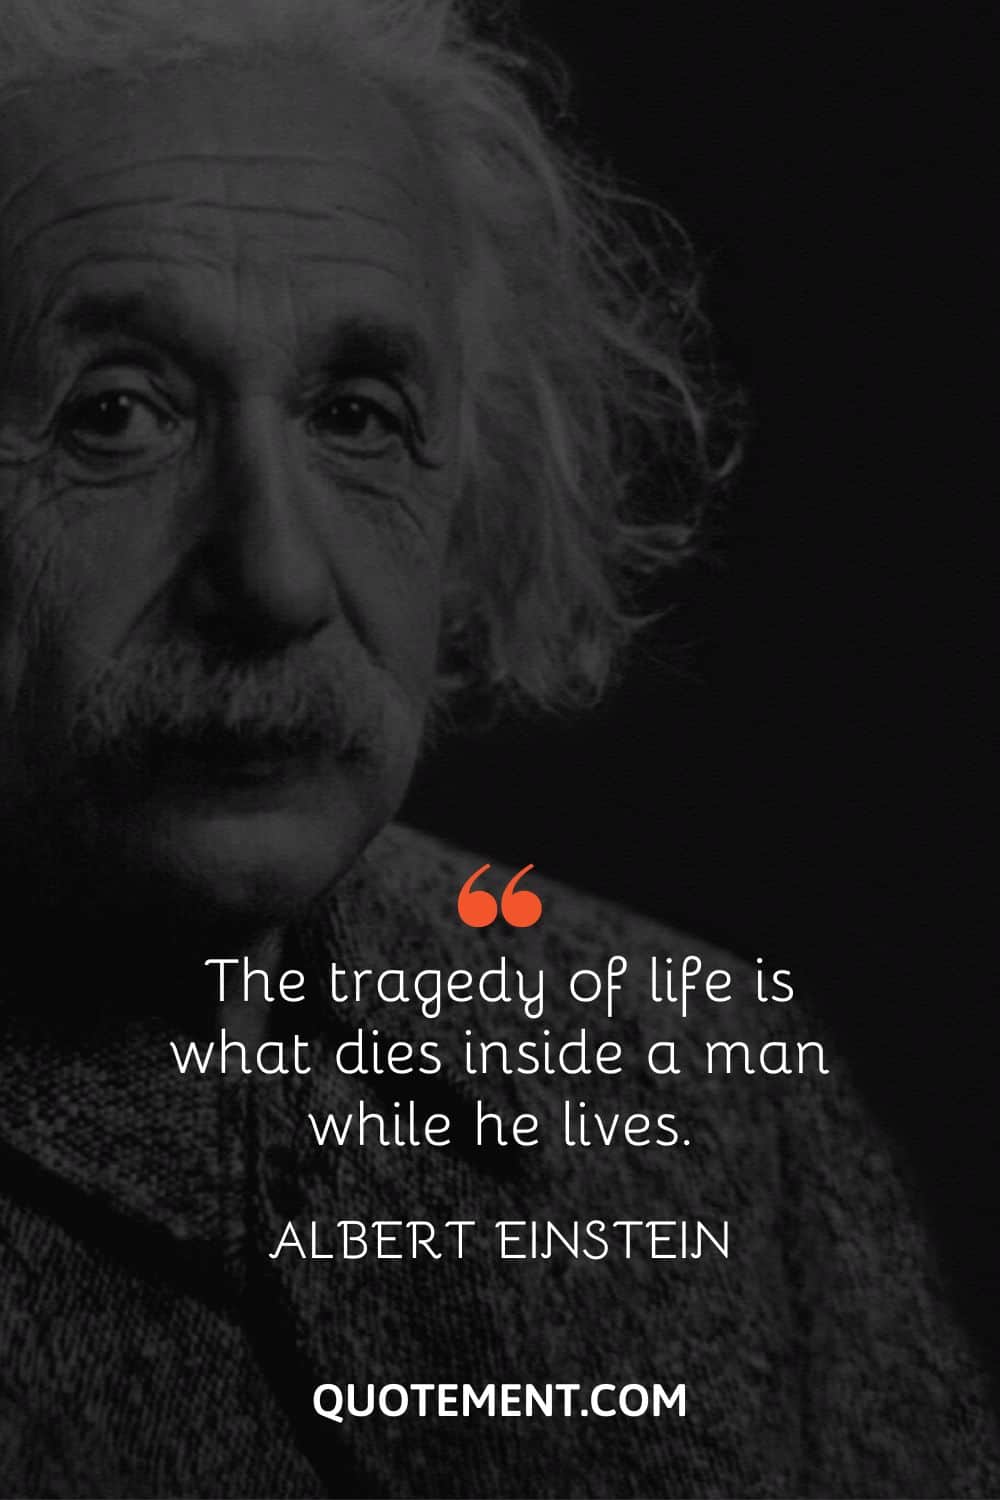 The tragedy of life is what dies inside a man while he lives